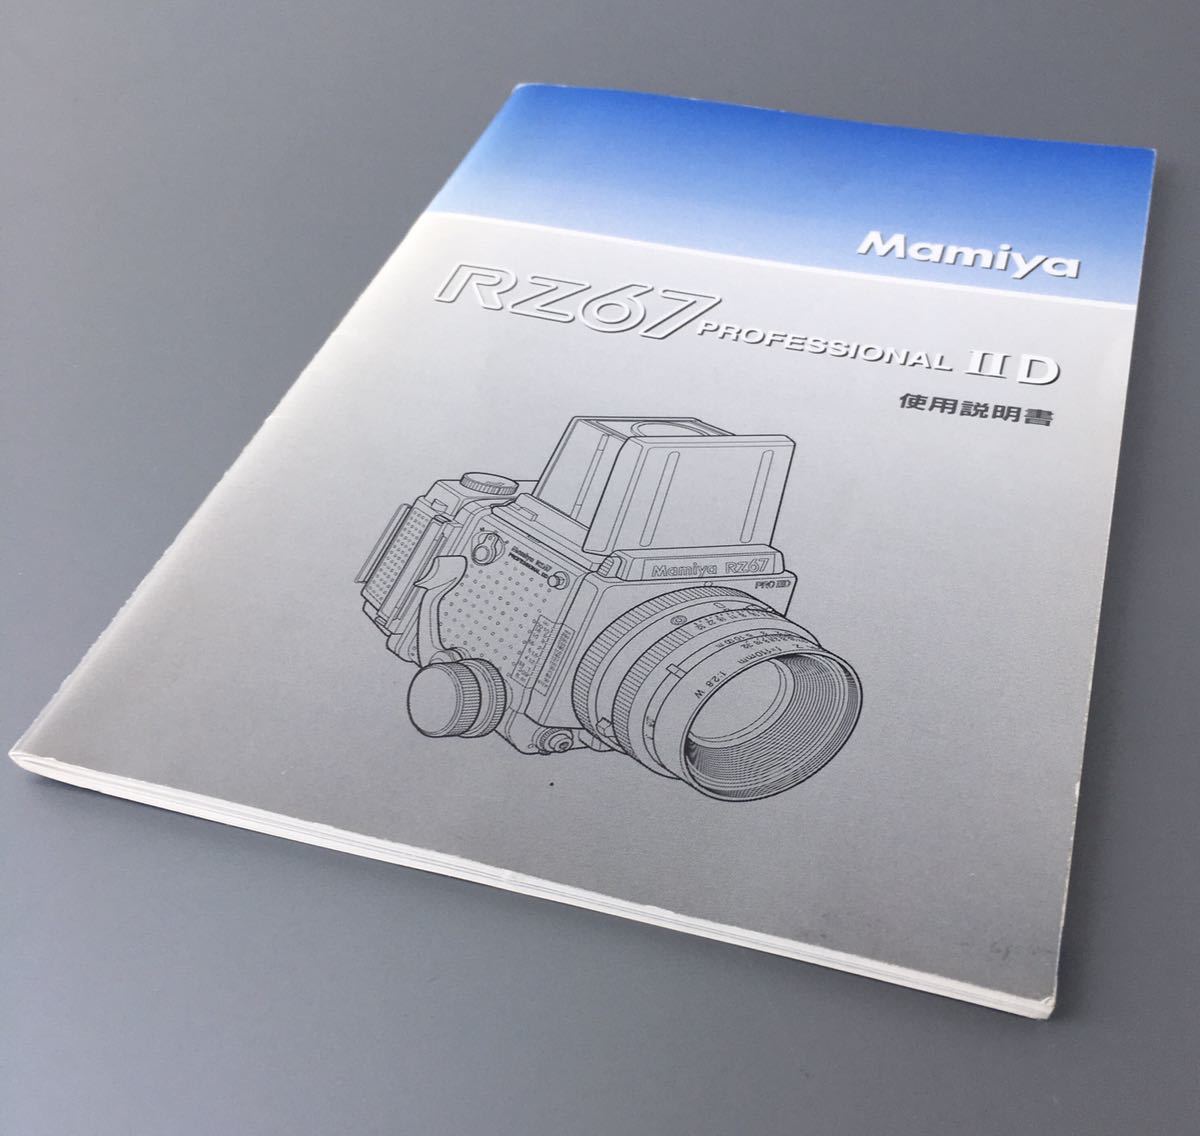  Mamiya Mamiya RZ67 PROFESSIONAL II D use instructions ( regular version *2 color ..* all 70 page )[ unused as good as new goods ] * free shipping *